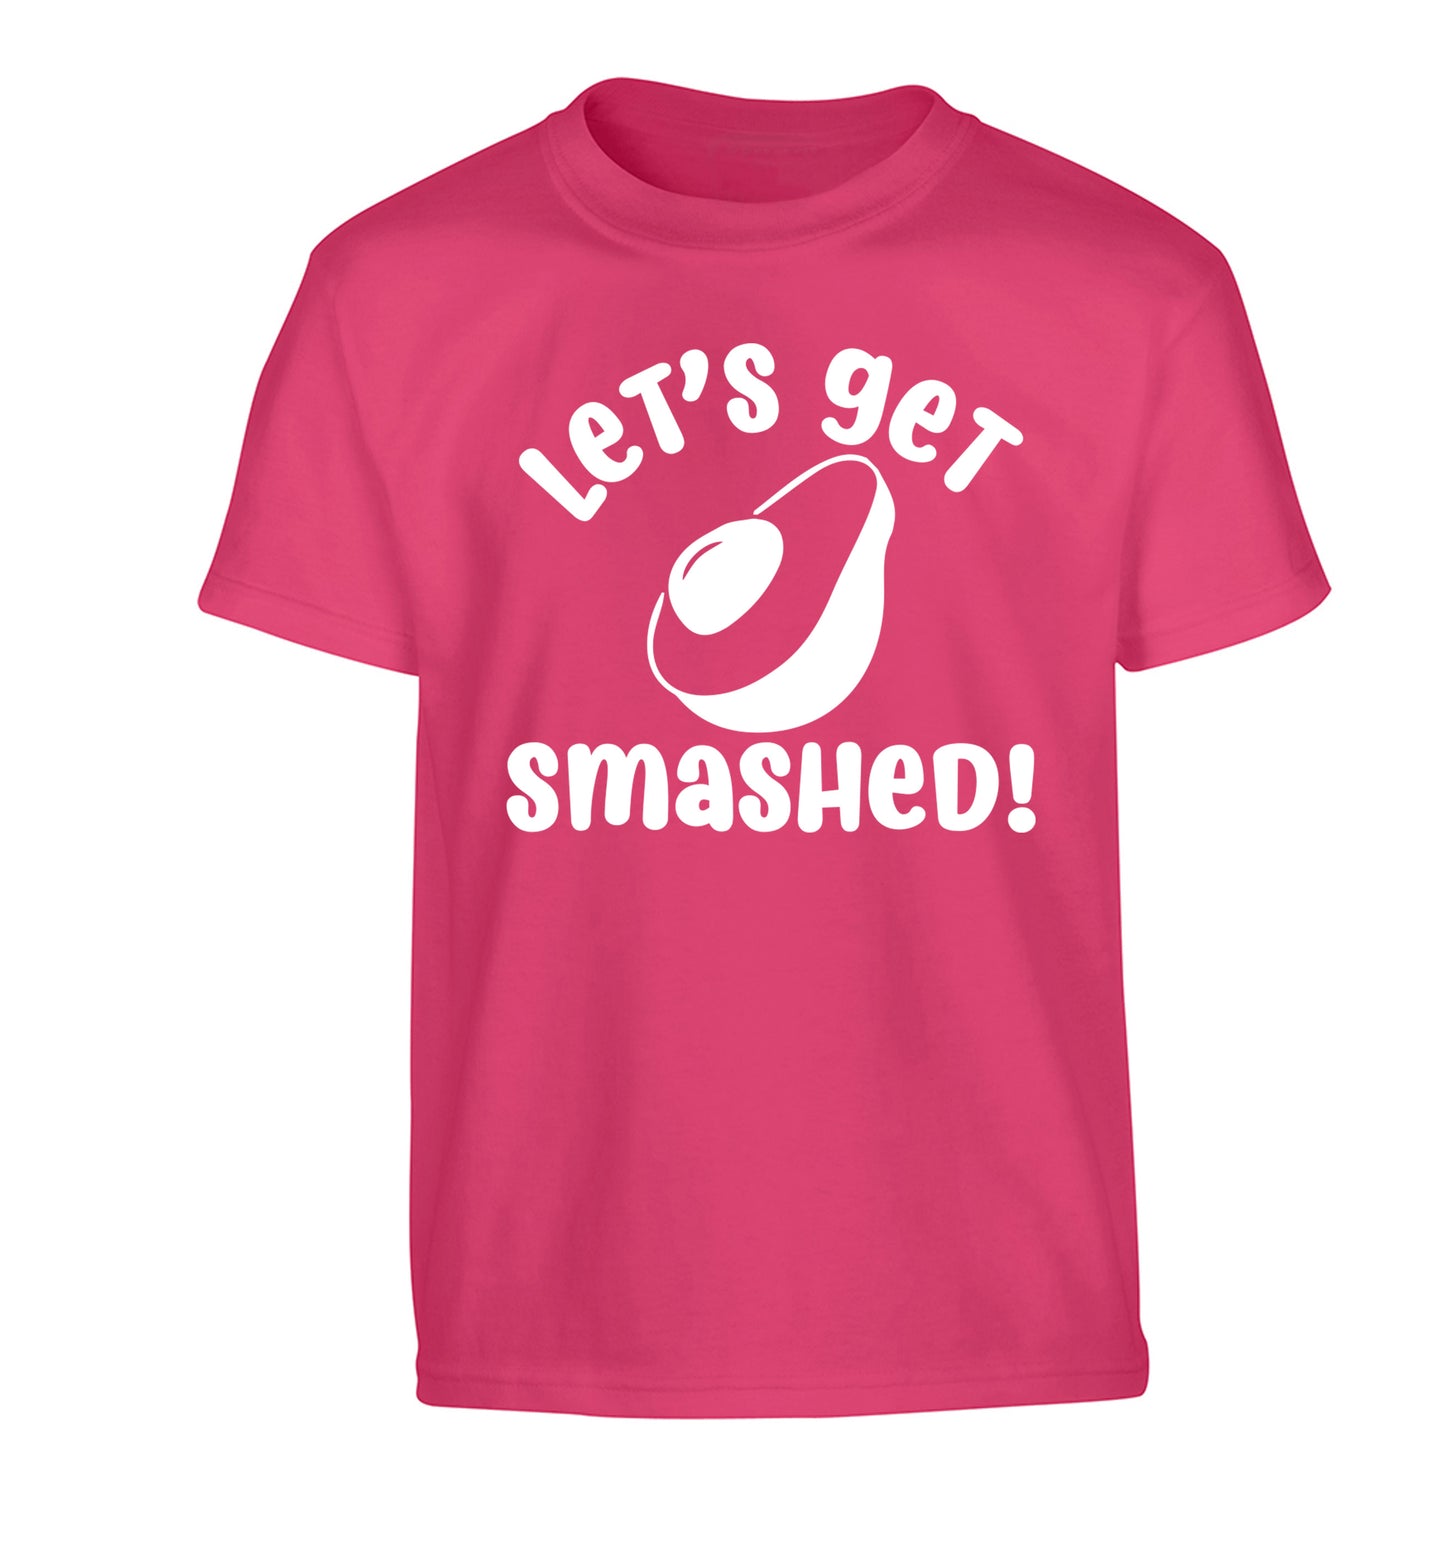 Let's get smashed Children's pink Tshirt 12-14 Years